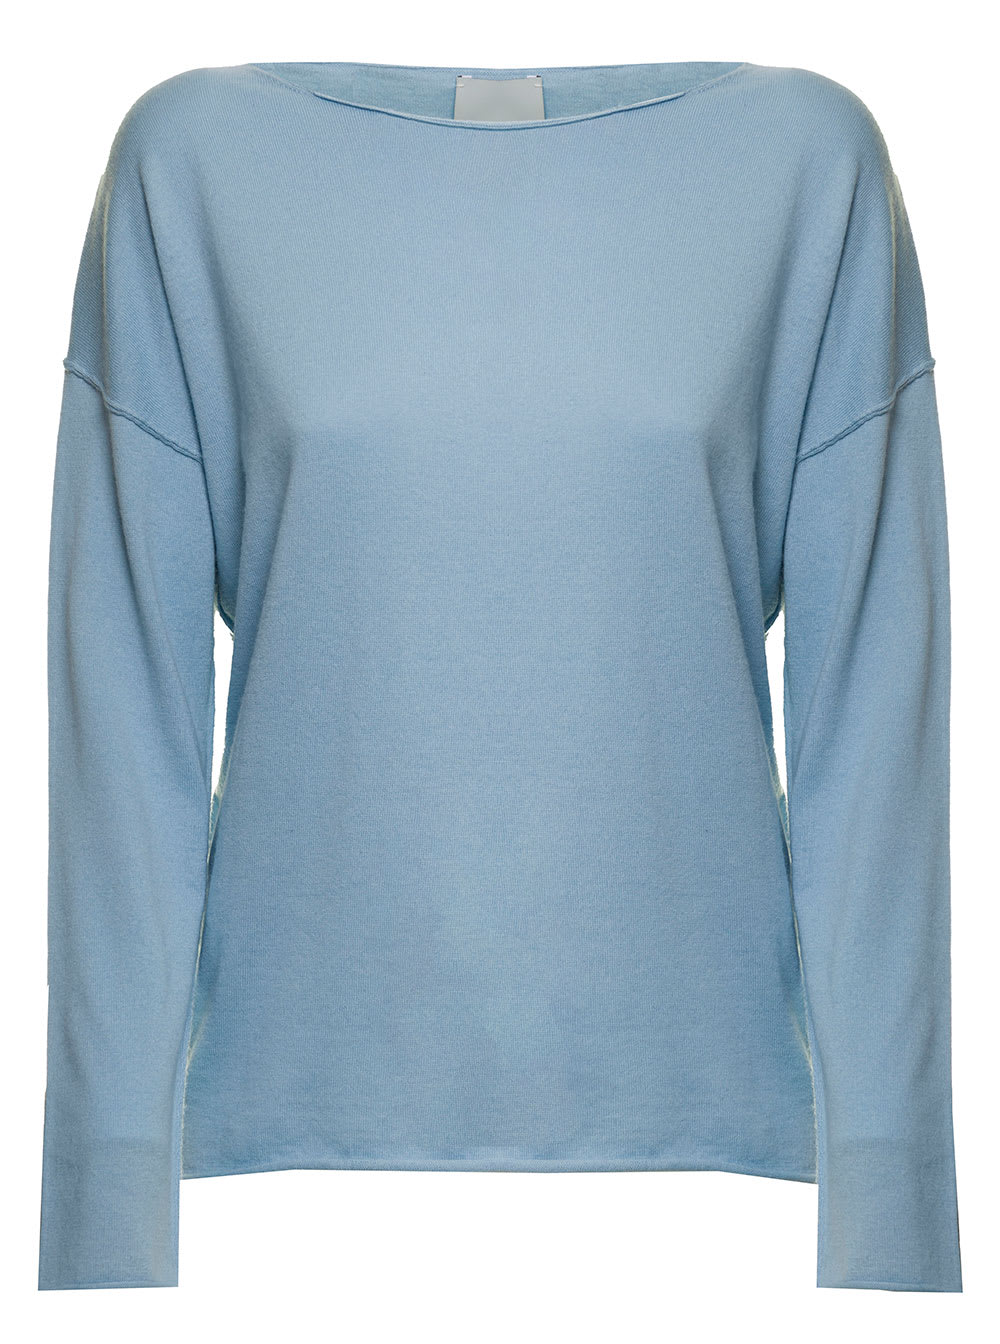 Allude Womans Cotton And Cashmere Sugar Pape Color Sweater